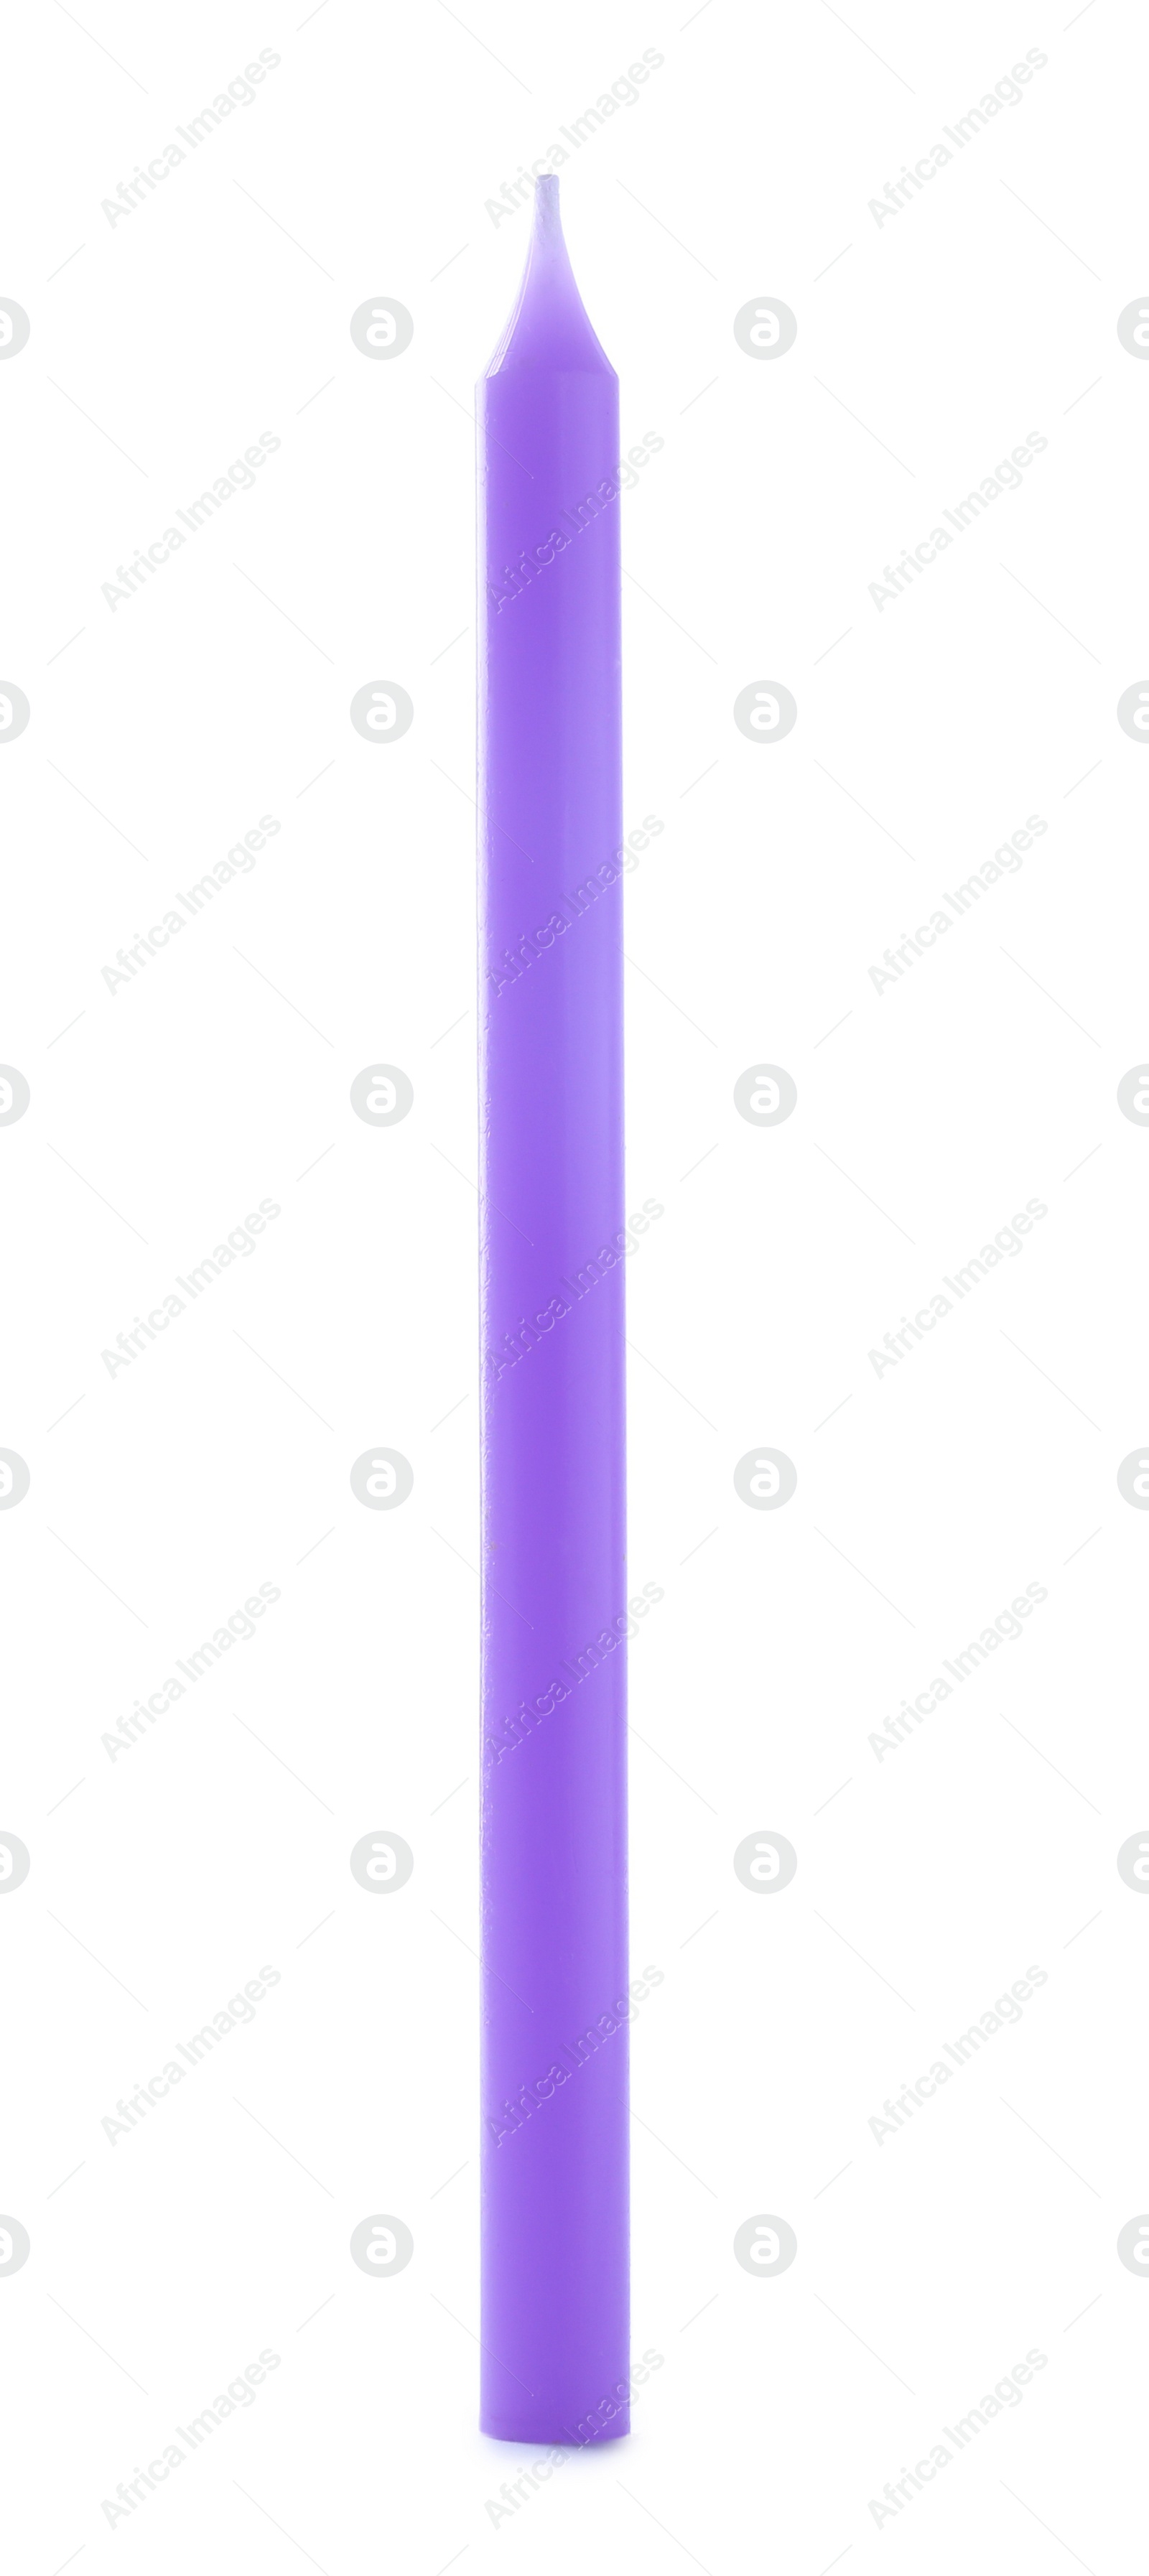 Photo of Thin purple birthday candle isolated on white